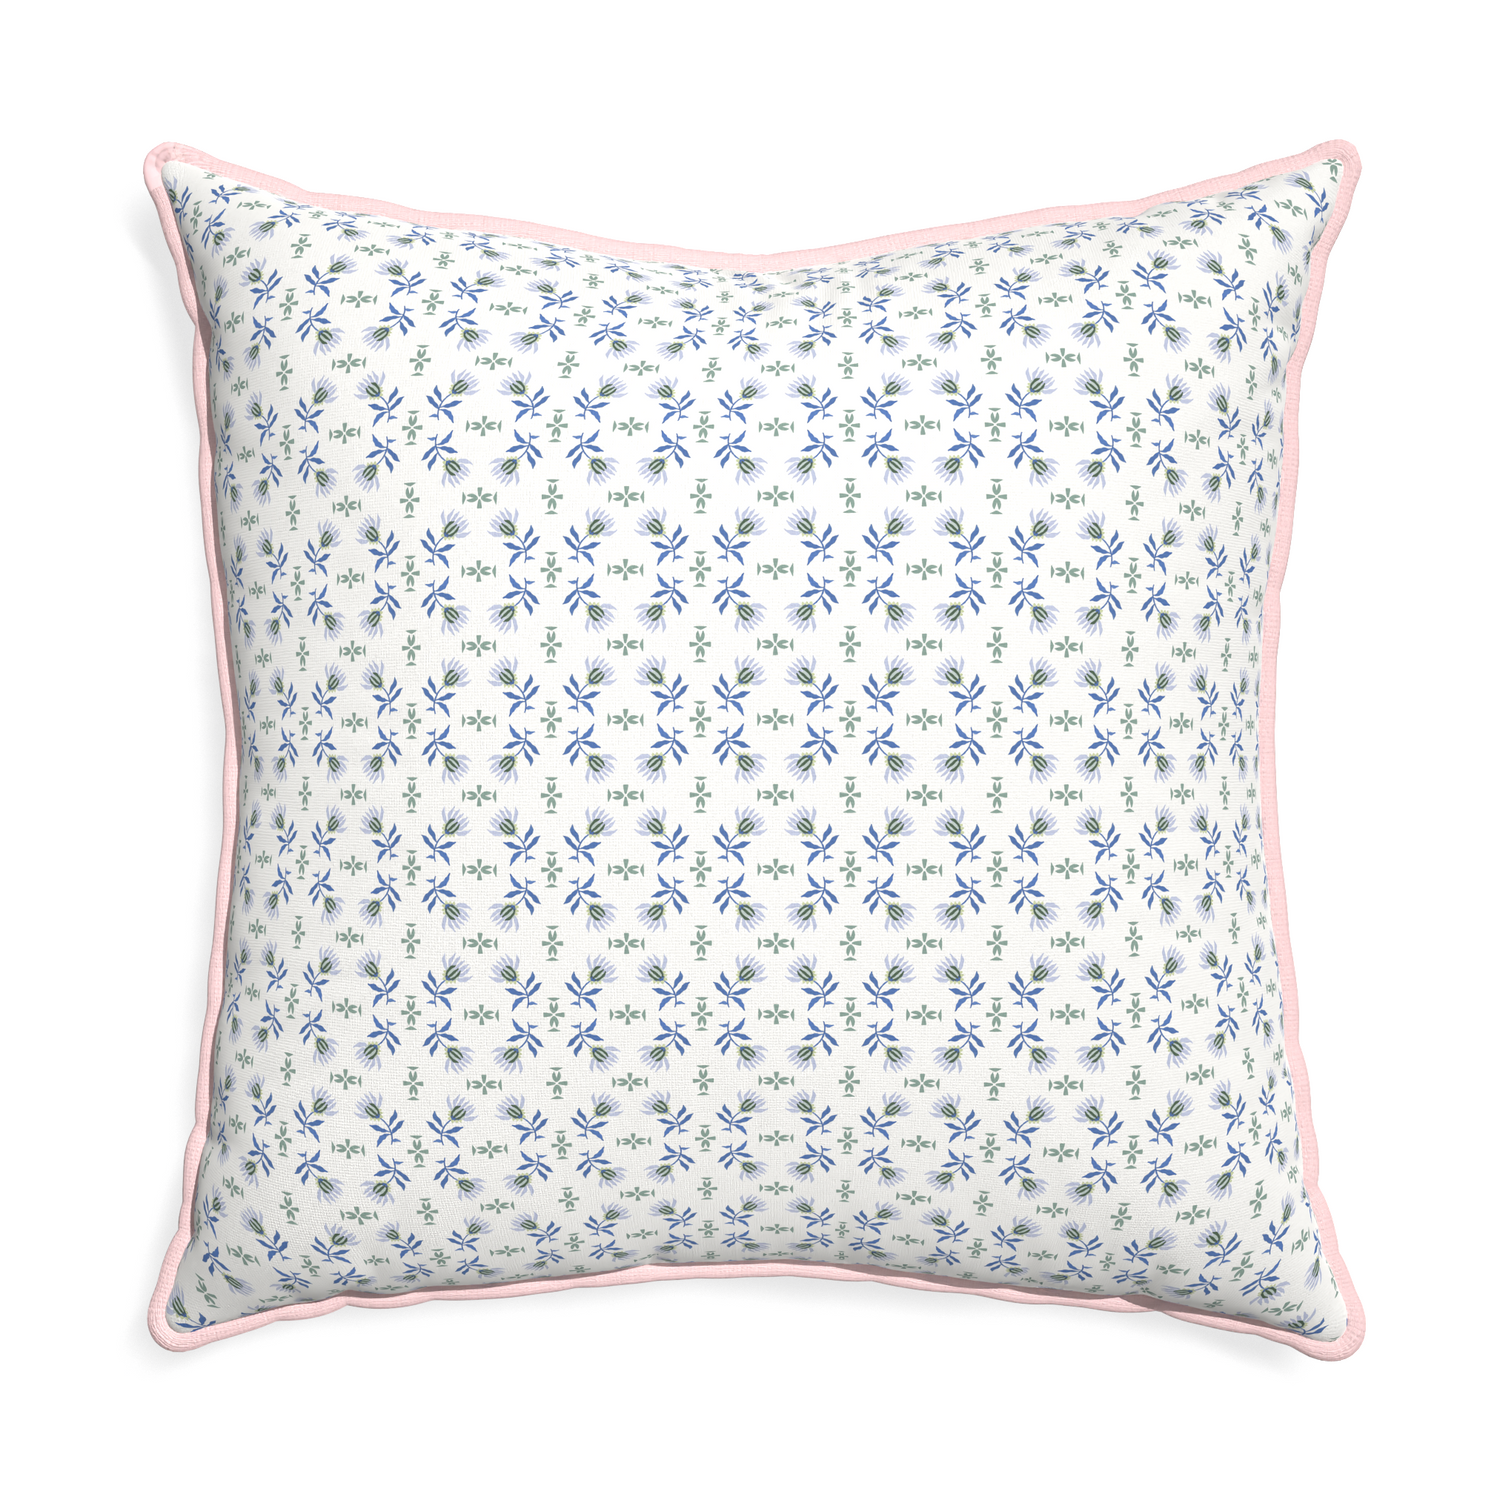 Euro-sham lee custom pillow with petal piping on white background